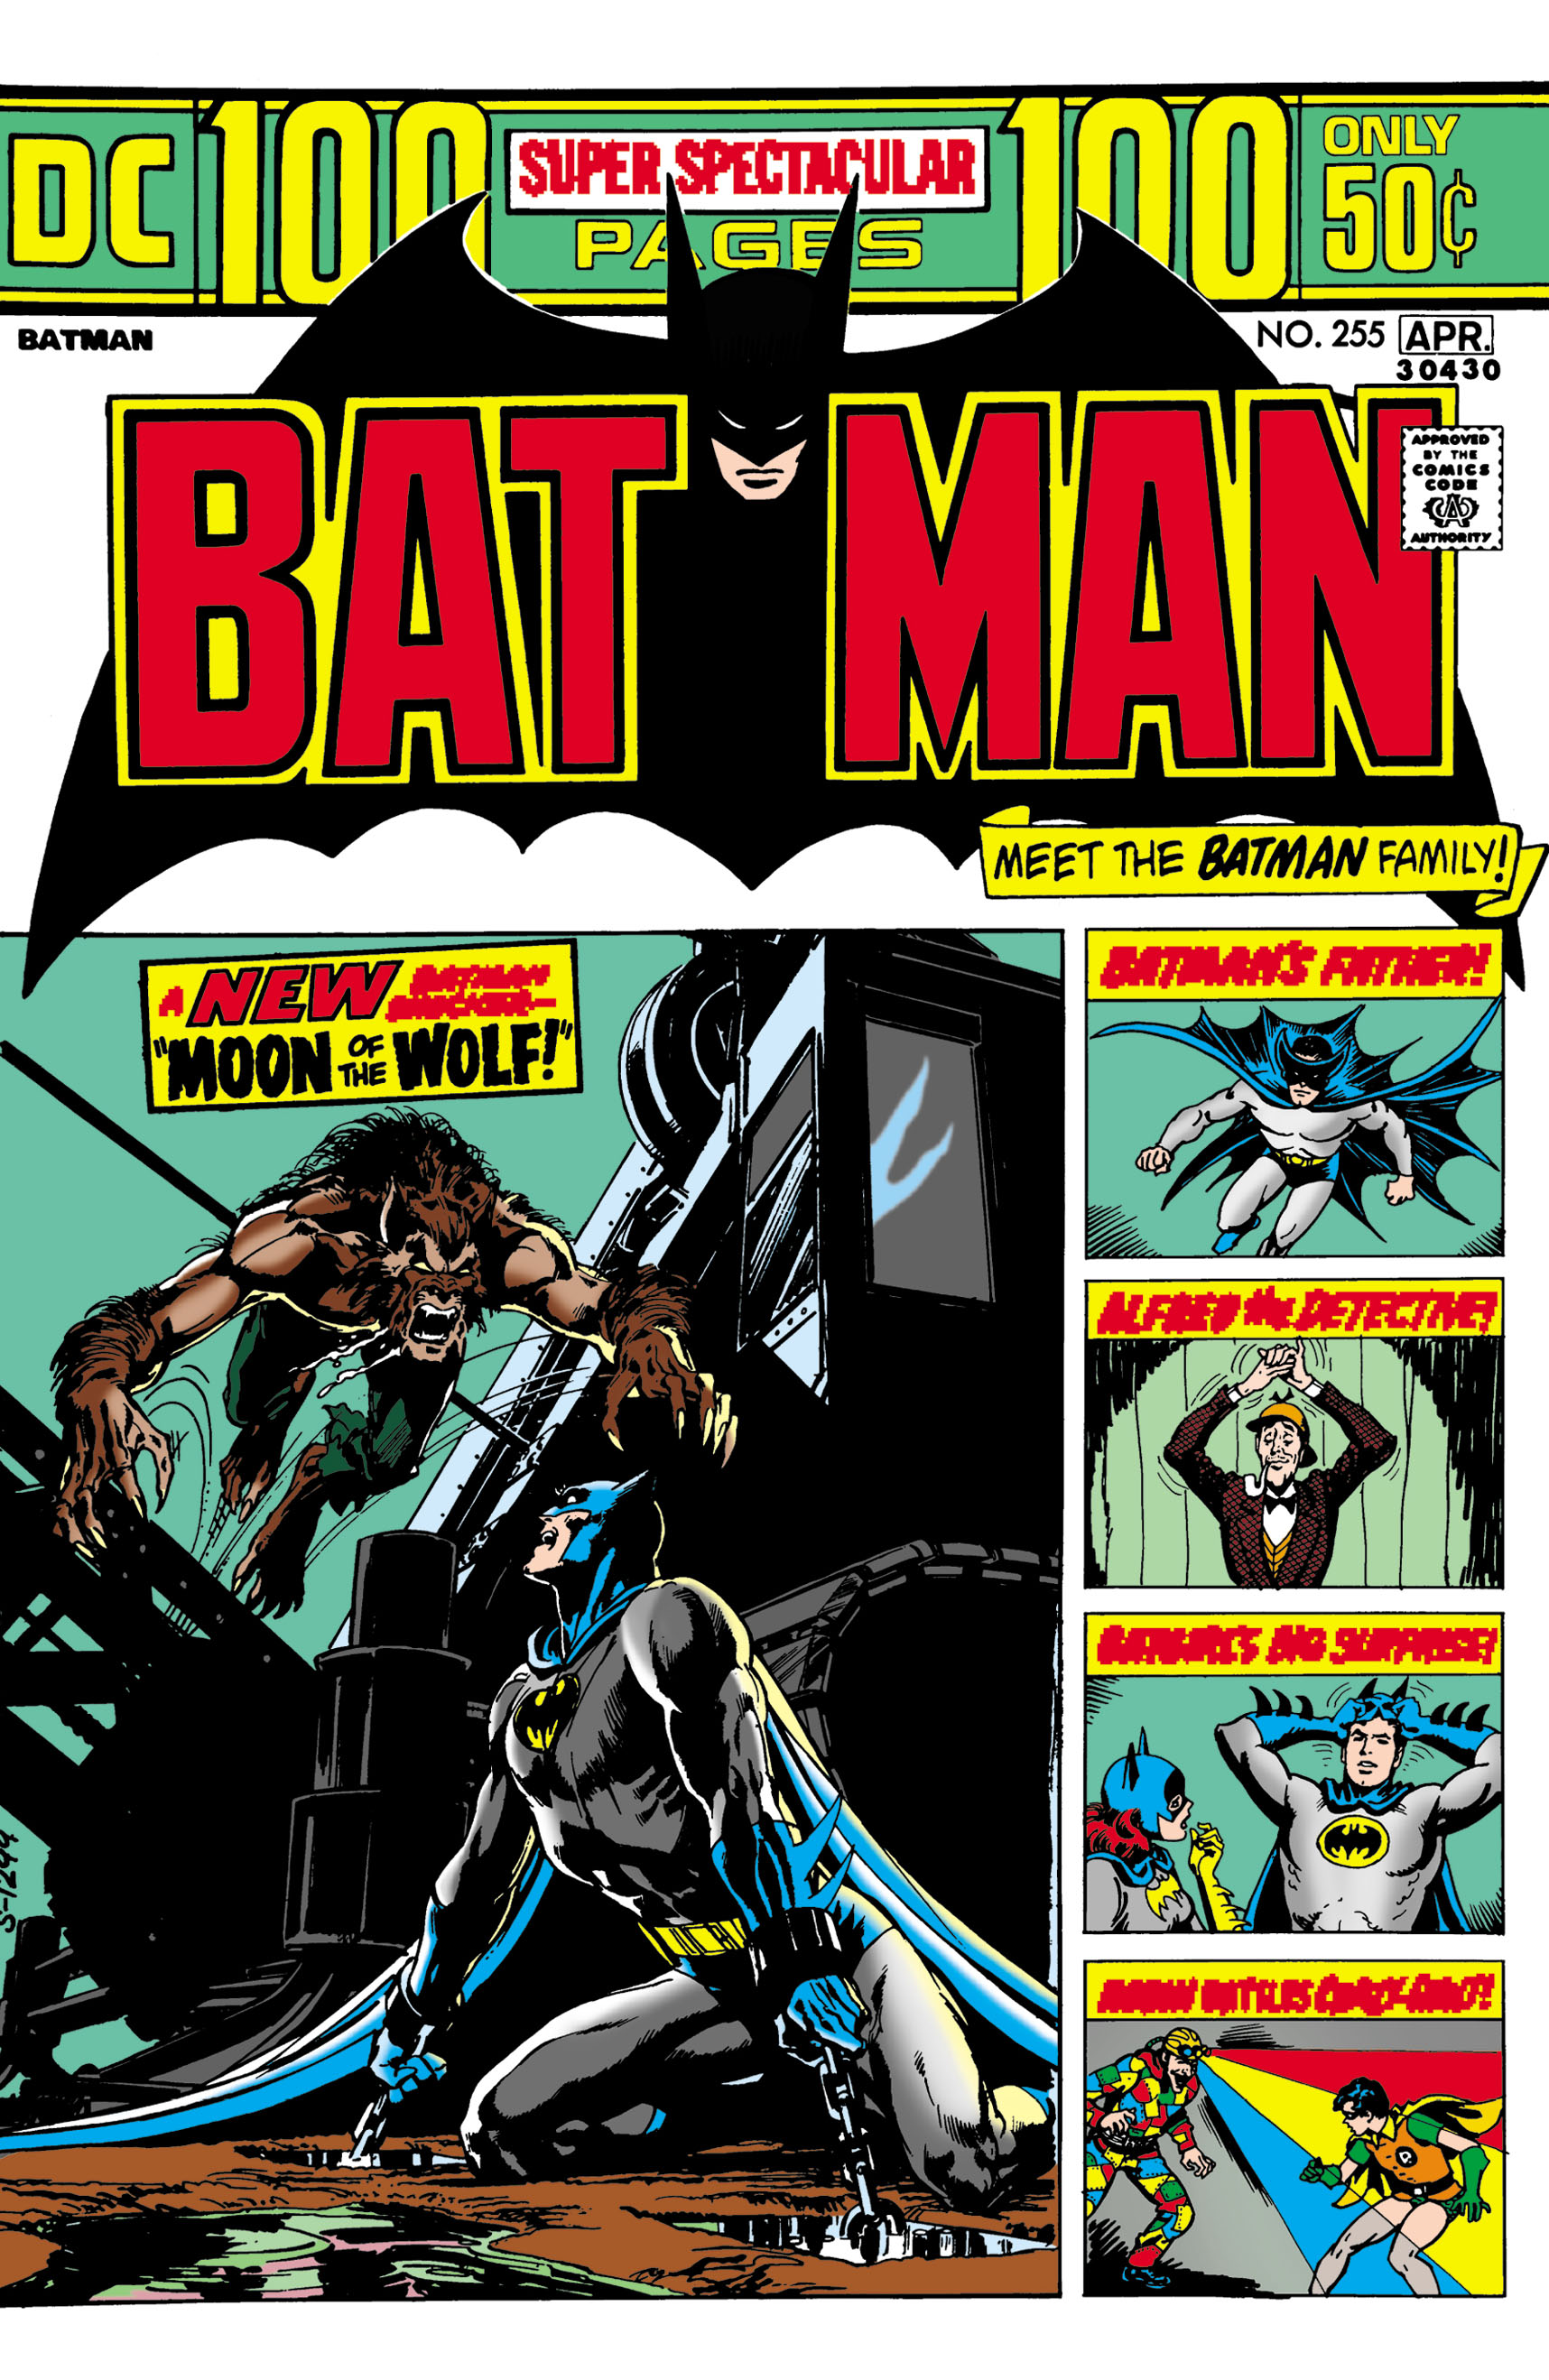 Batman 1940 Issue 255 | Read Batman 1940 Issue 255 comic online in high  quality. Read Full Comic online for free - Read comics online in high  quality .| READ COMIC ONLINE